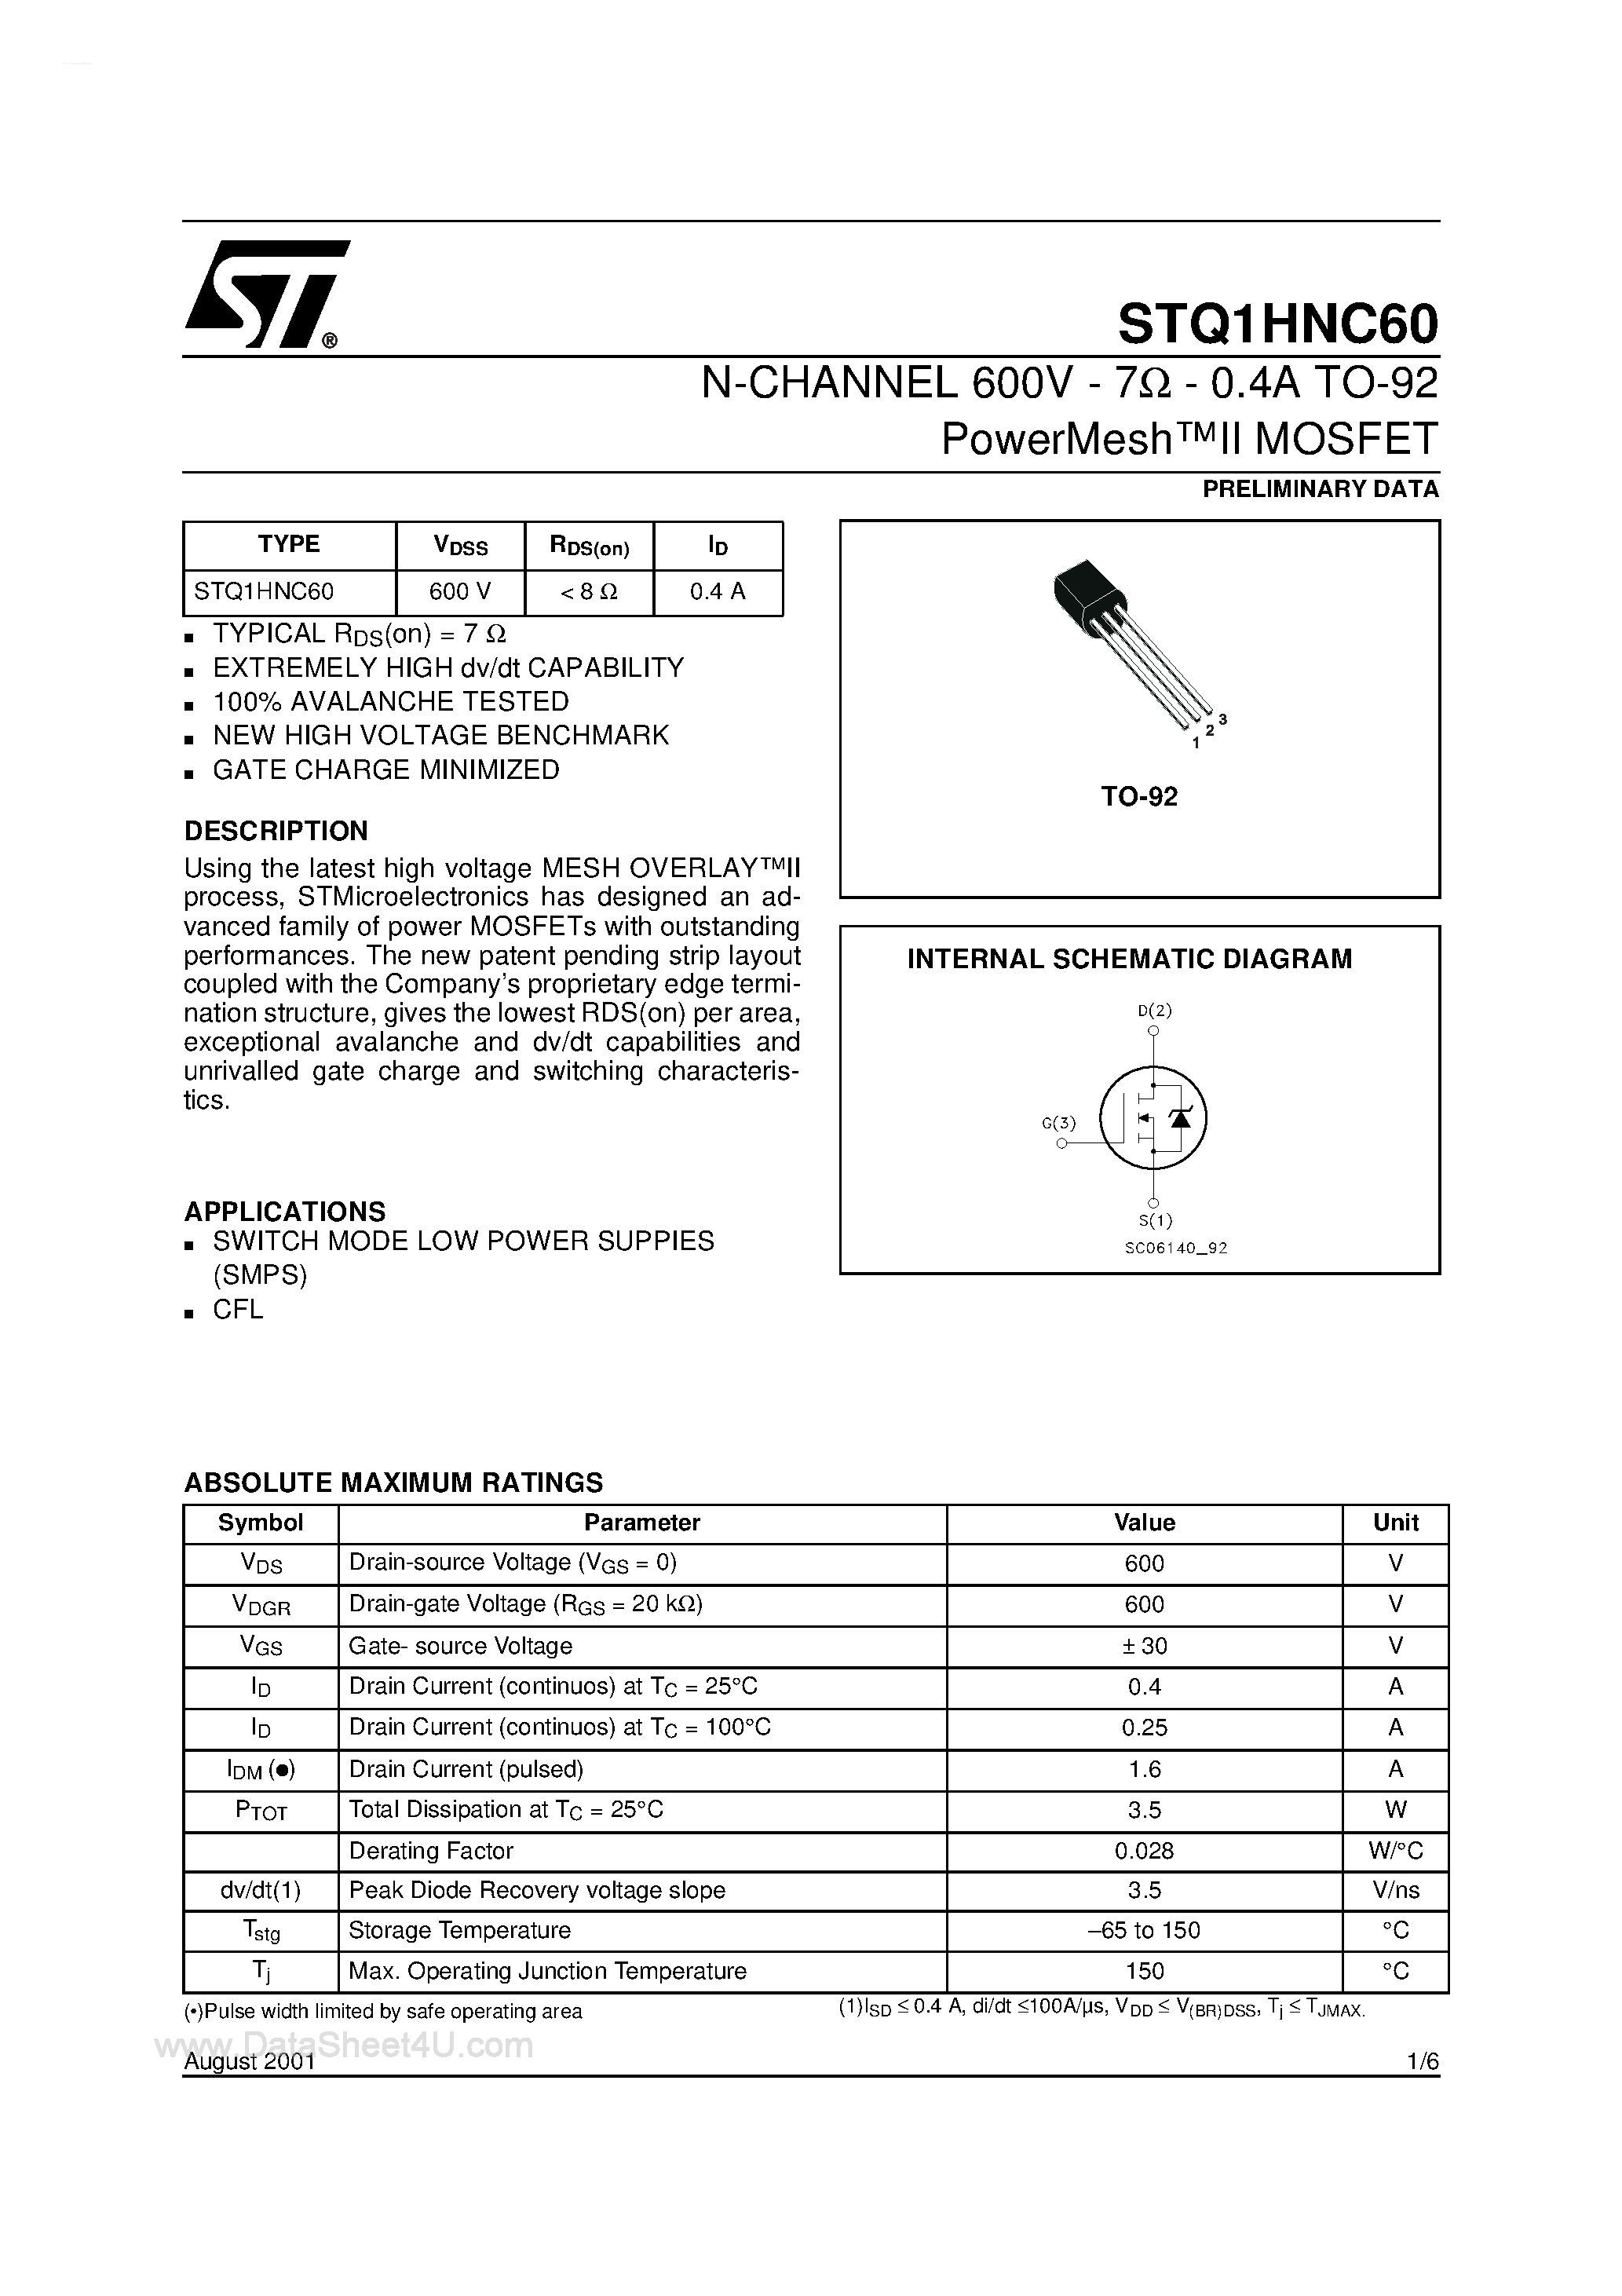 Datasheet STQ1HNC60 - N-CHANNEL MOSFET page 1